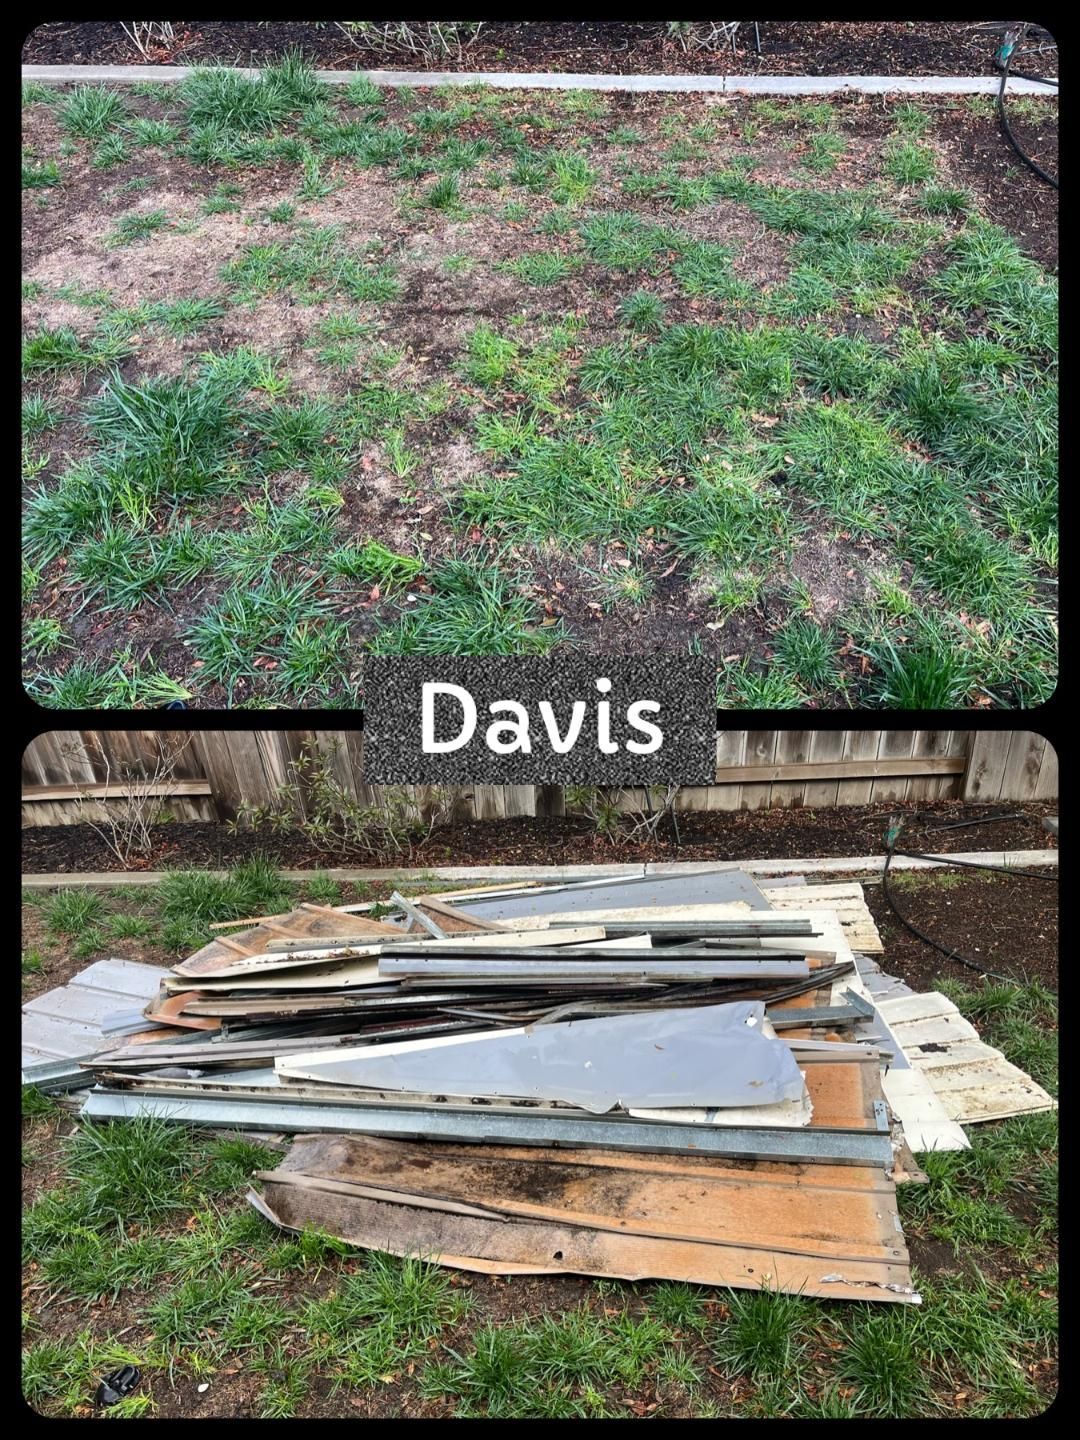 A before and after picture of a lawn and a pile of wood.